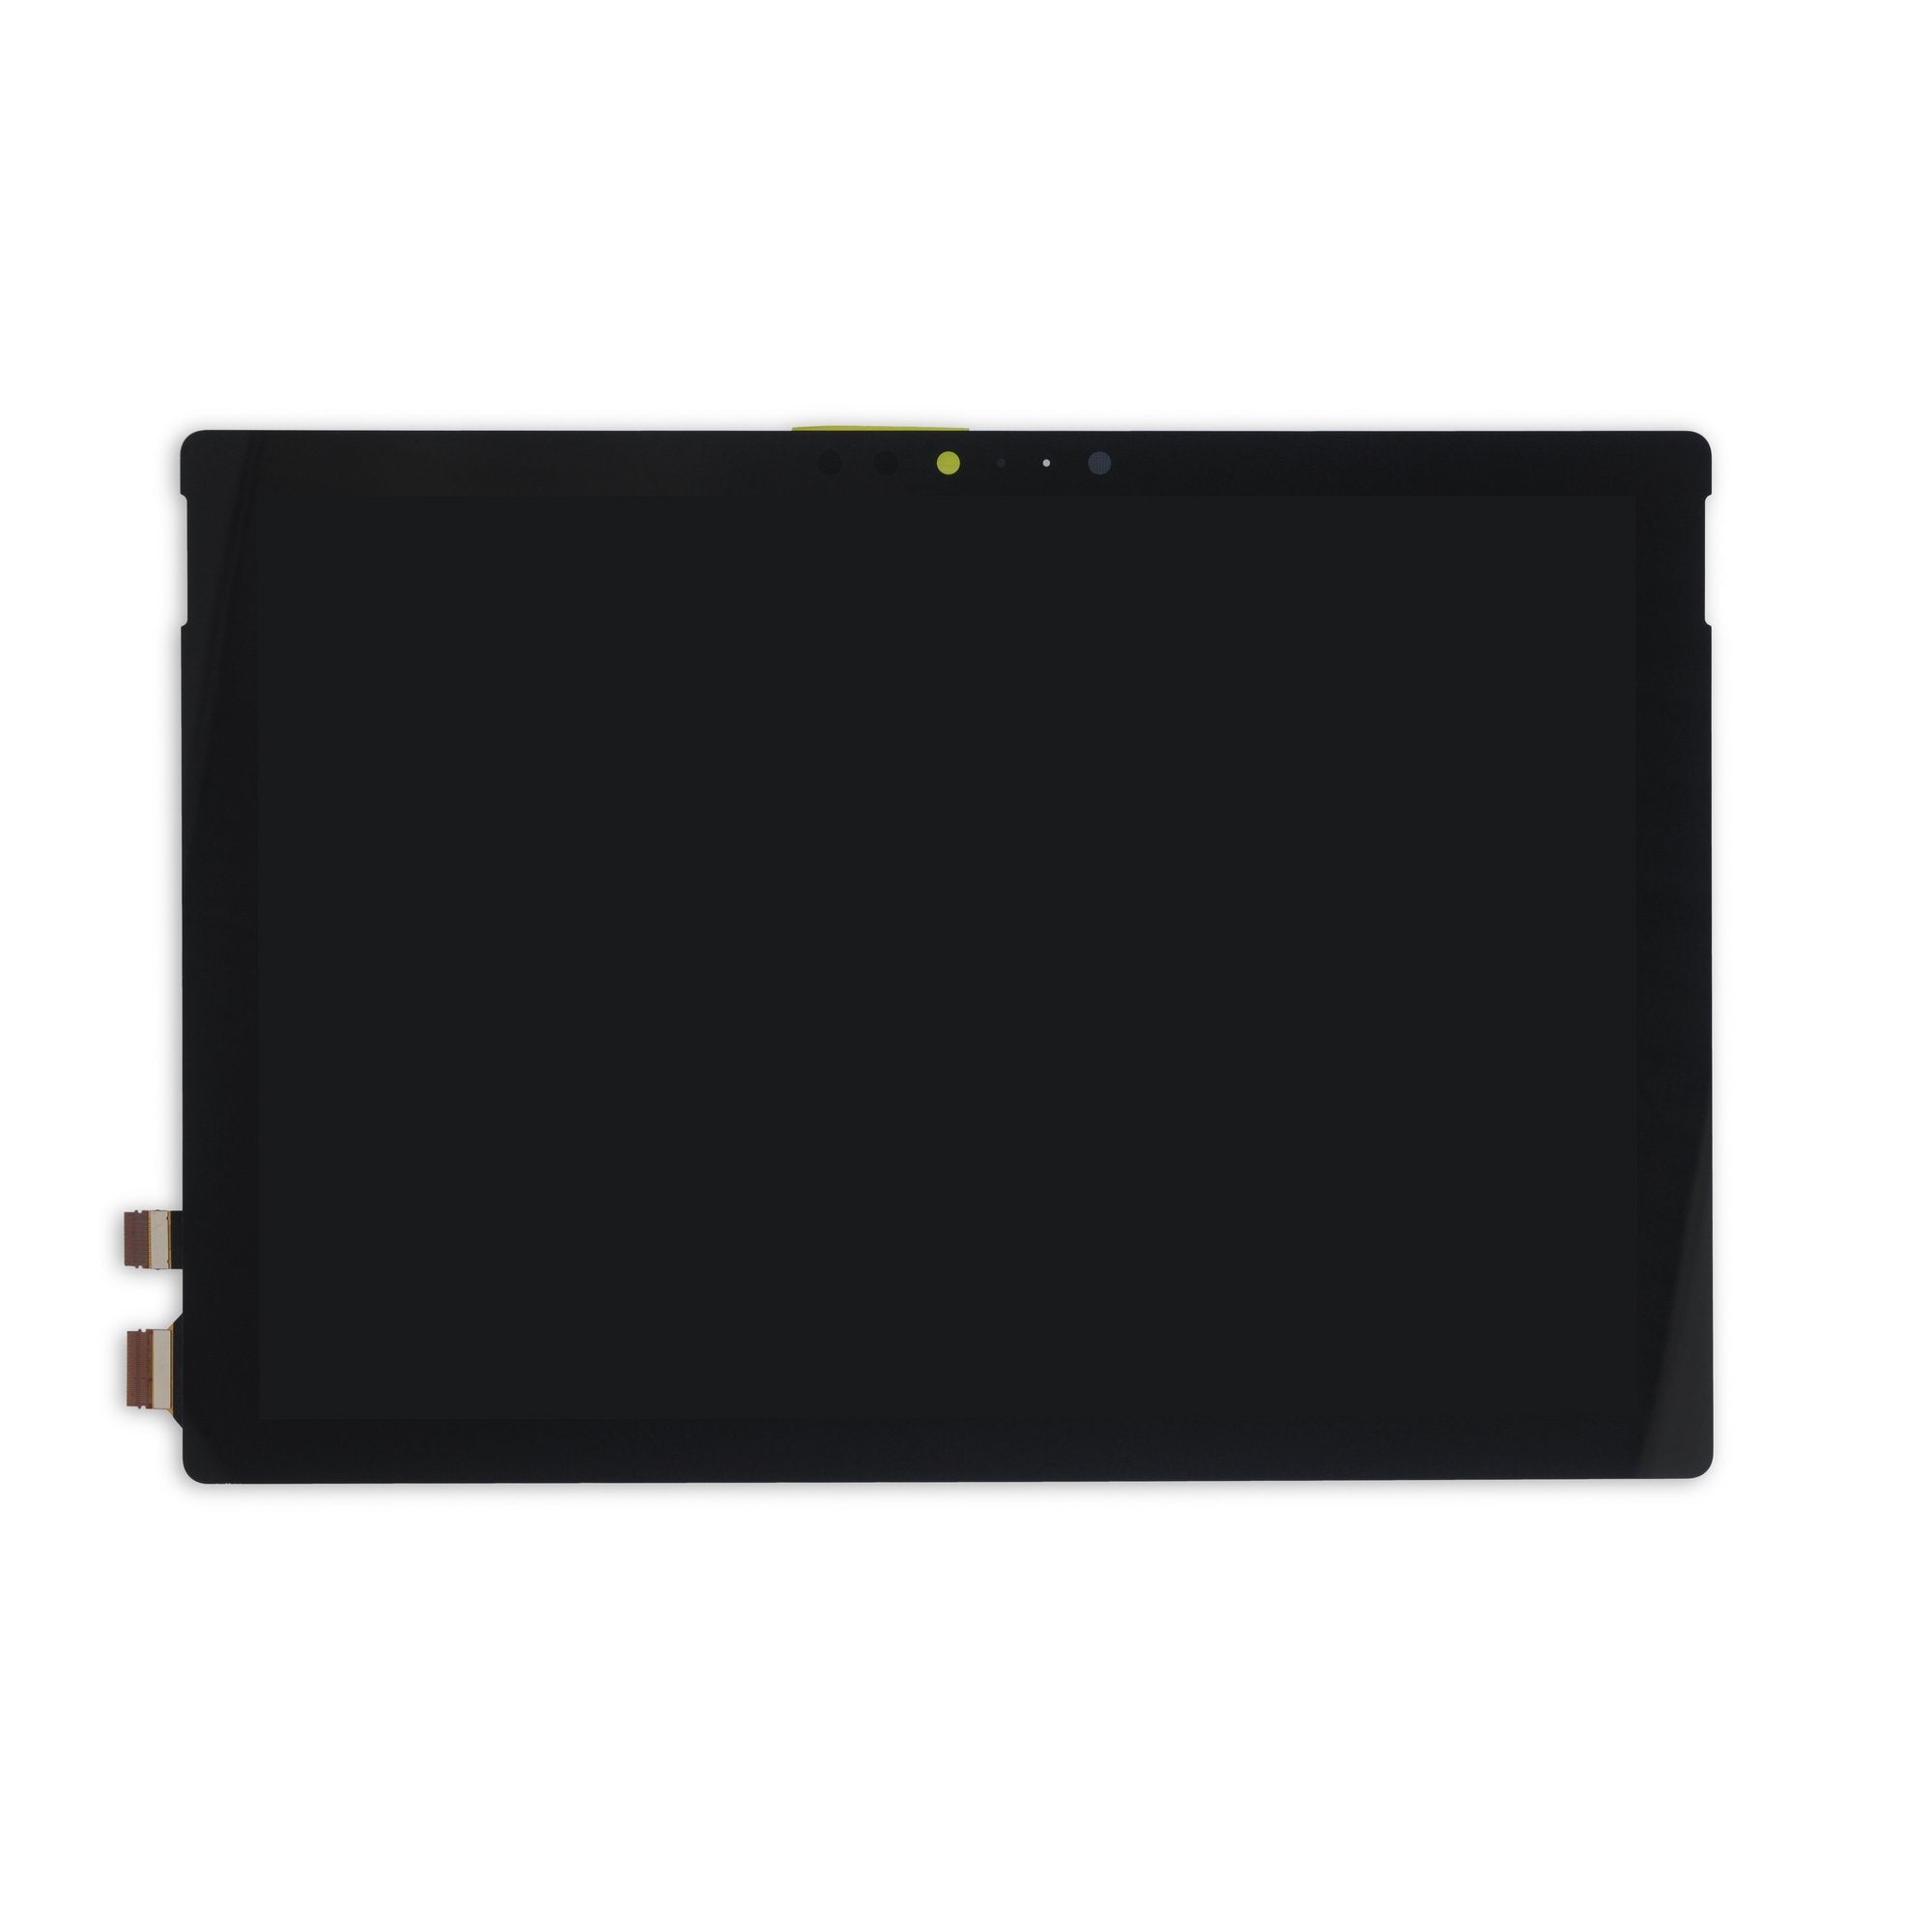 Microsoft Surface Pro 2 LCD Display Replacement - iFixit Repair Guide